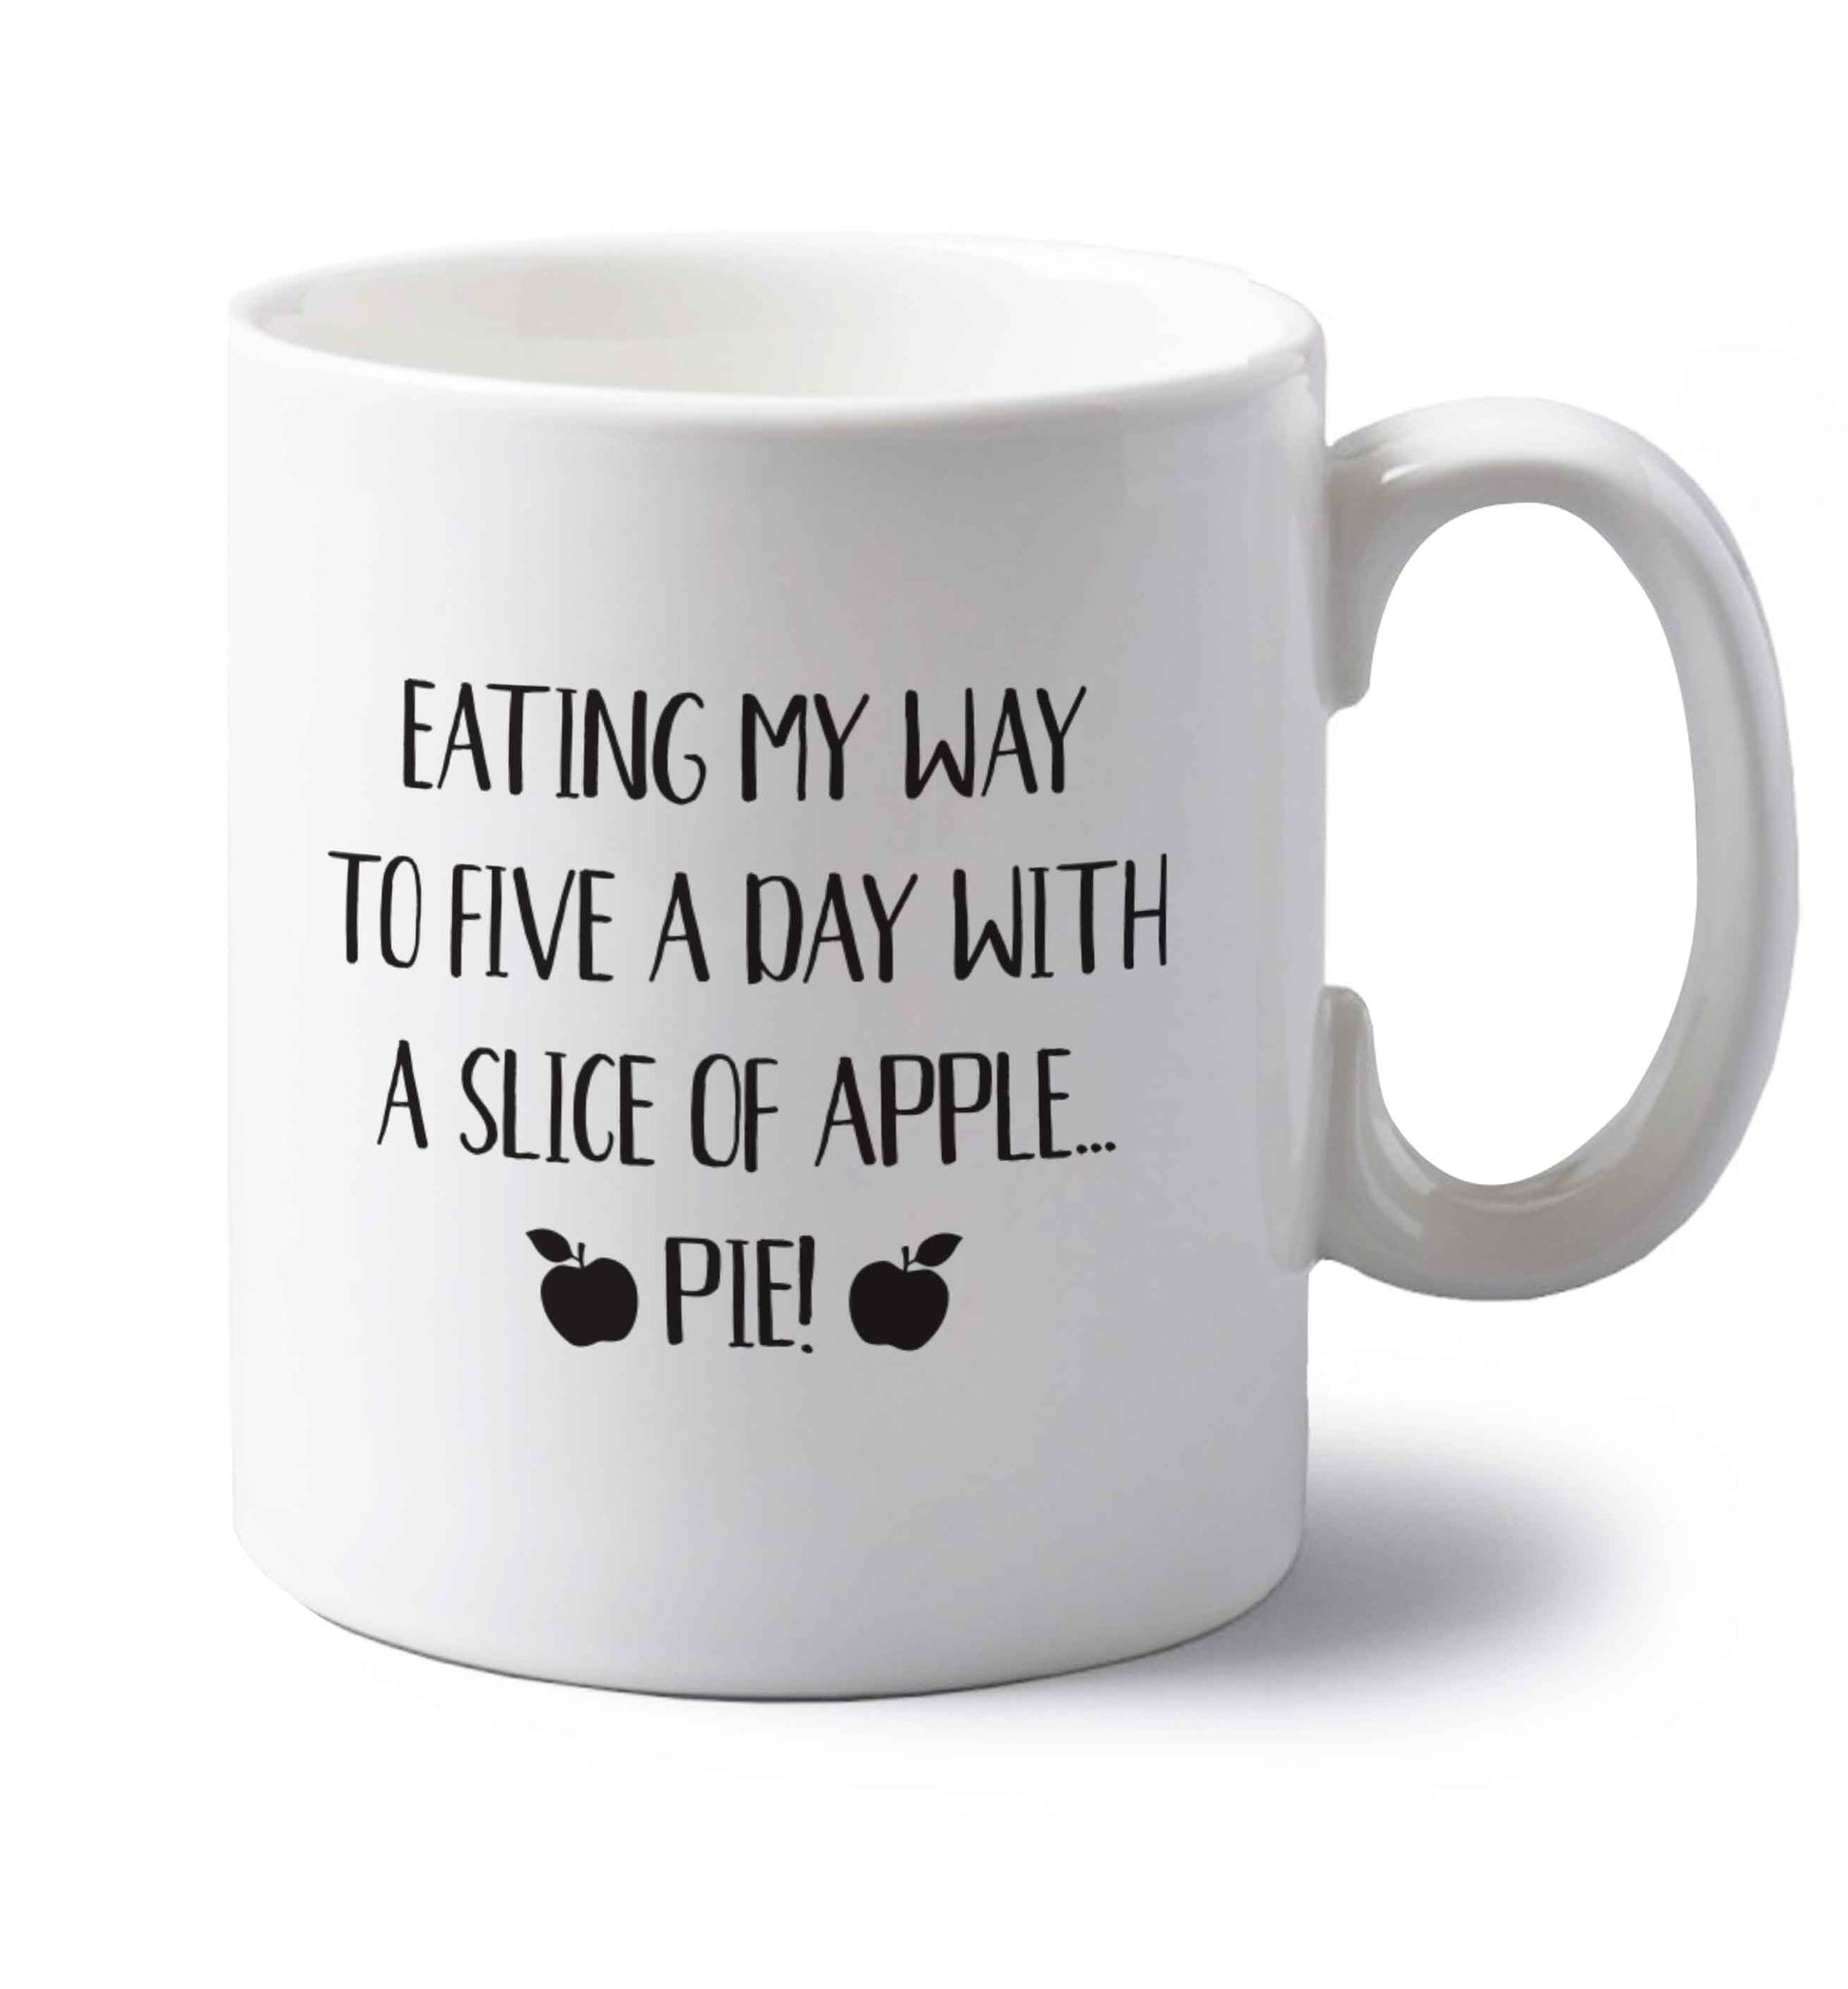 Eating my way to five a day with a slice of apple pie left handed white ceramic mug 